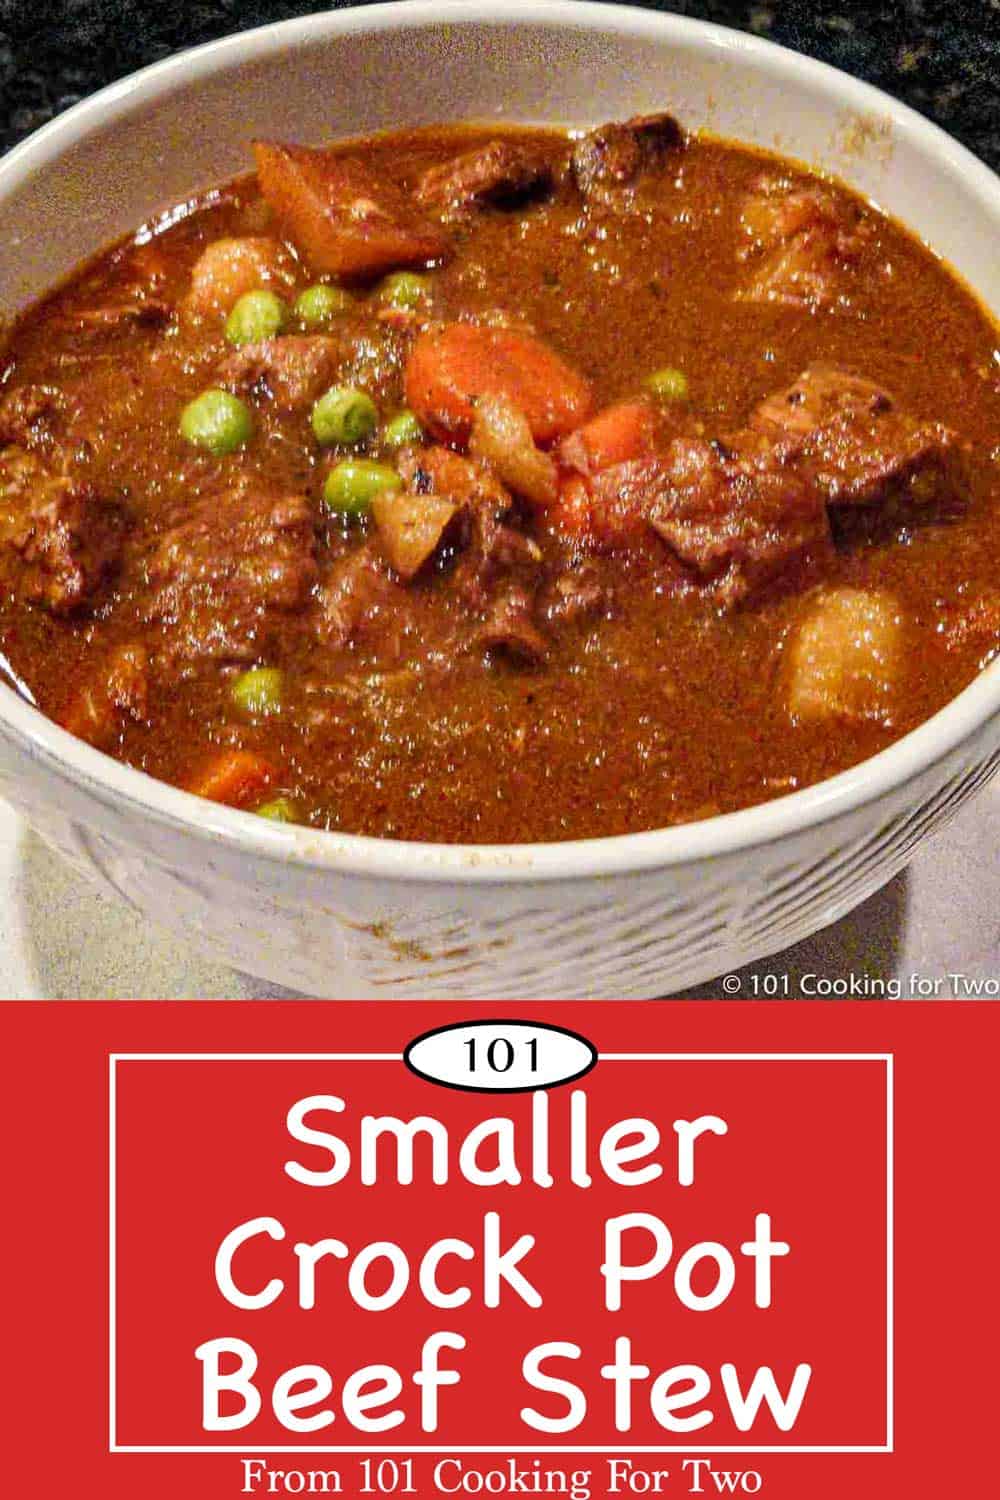 Small Crock Pot Beef Stew - 101 Cooking For Two